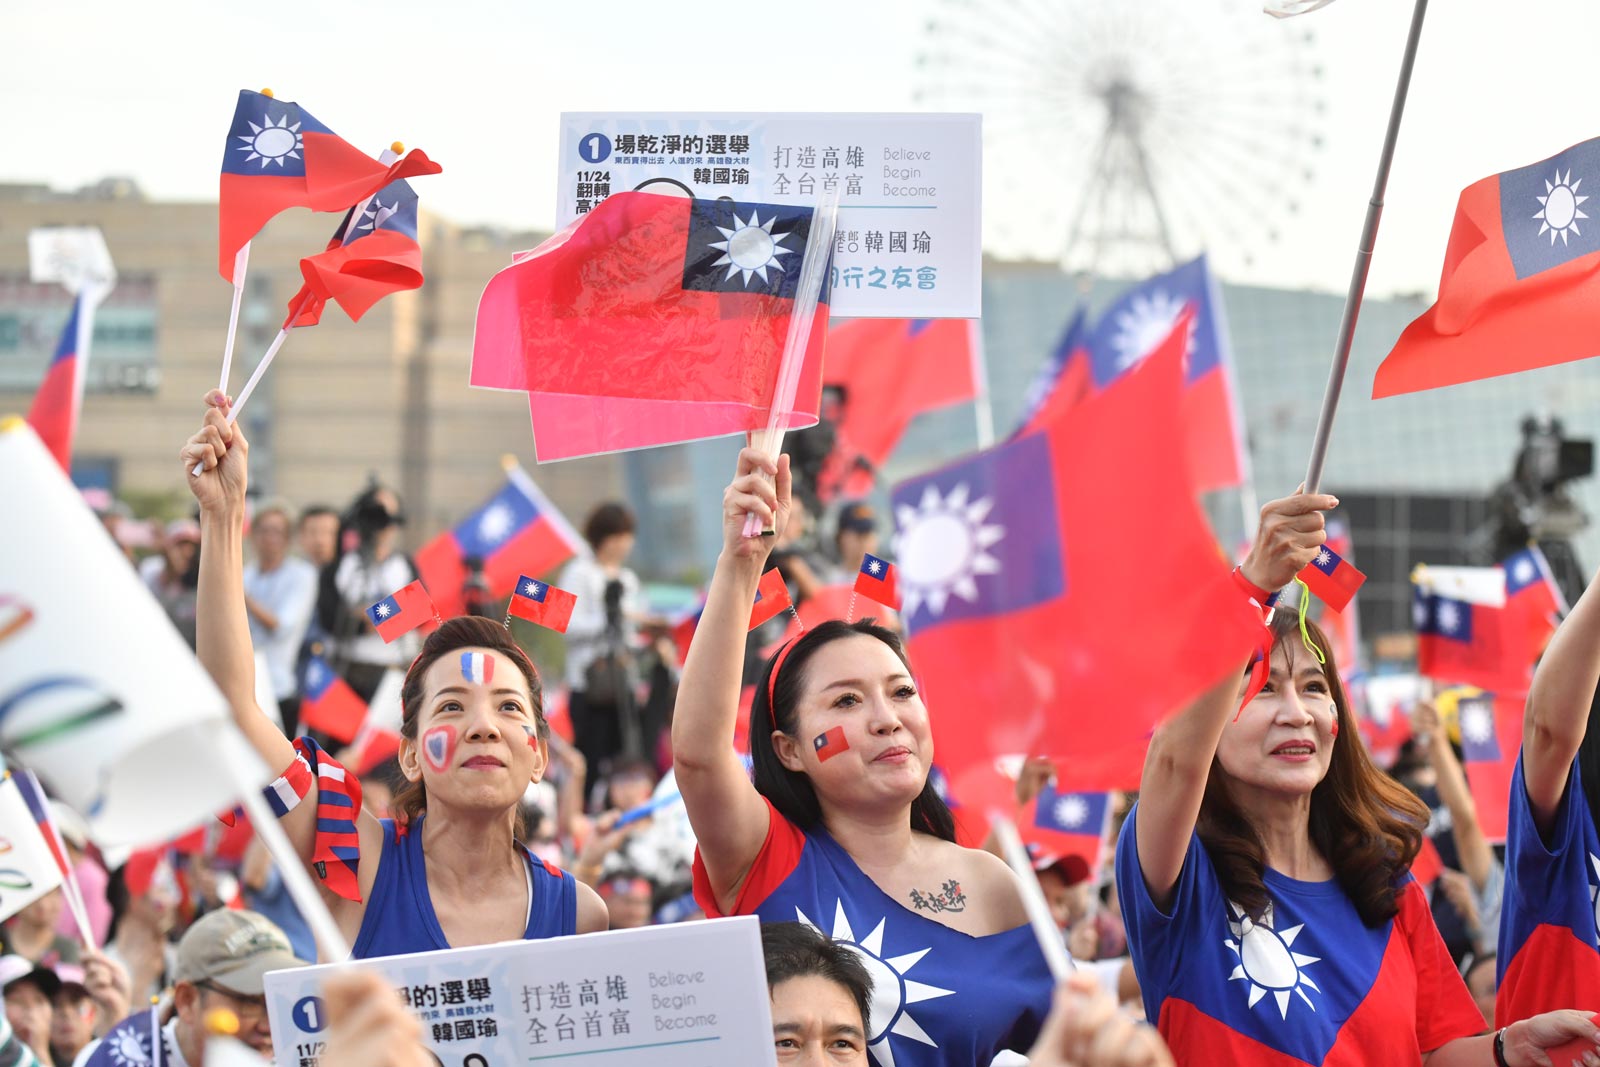 KMT's victory vs. DPP's defeat? The real story behind Taiwan’s local elections